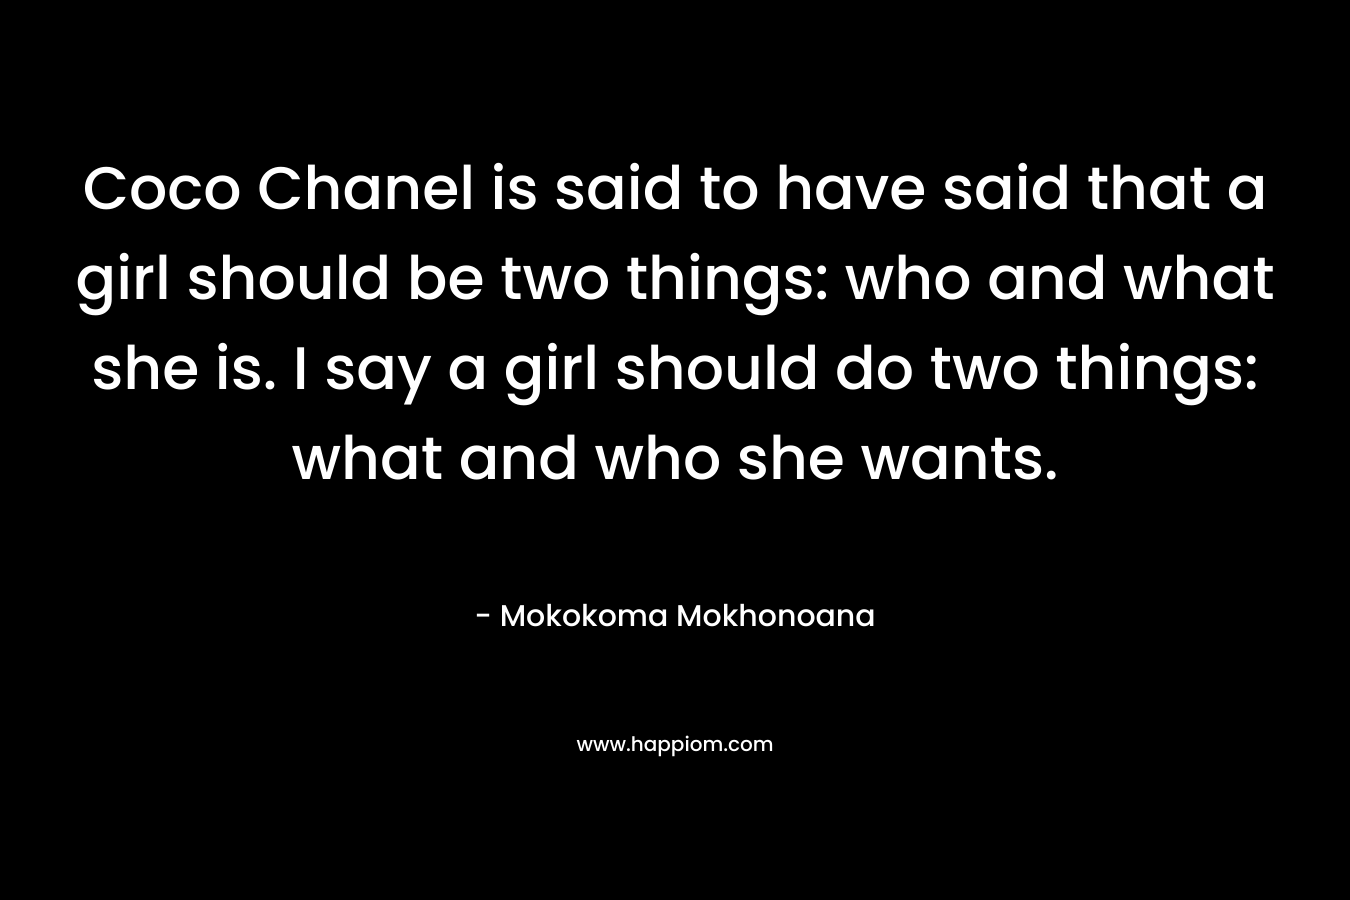 Coco Chanel is said to have said that a girl should be two things: who and what she is. I say a girl should do two things: what and who she wants.